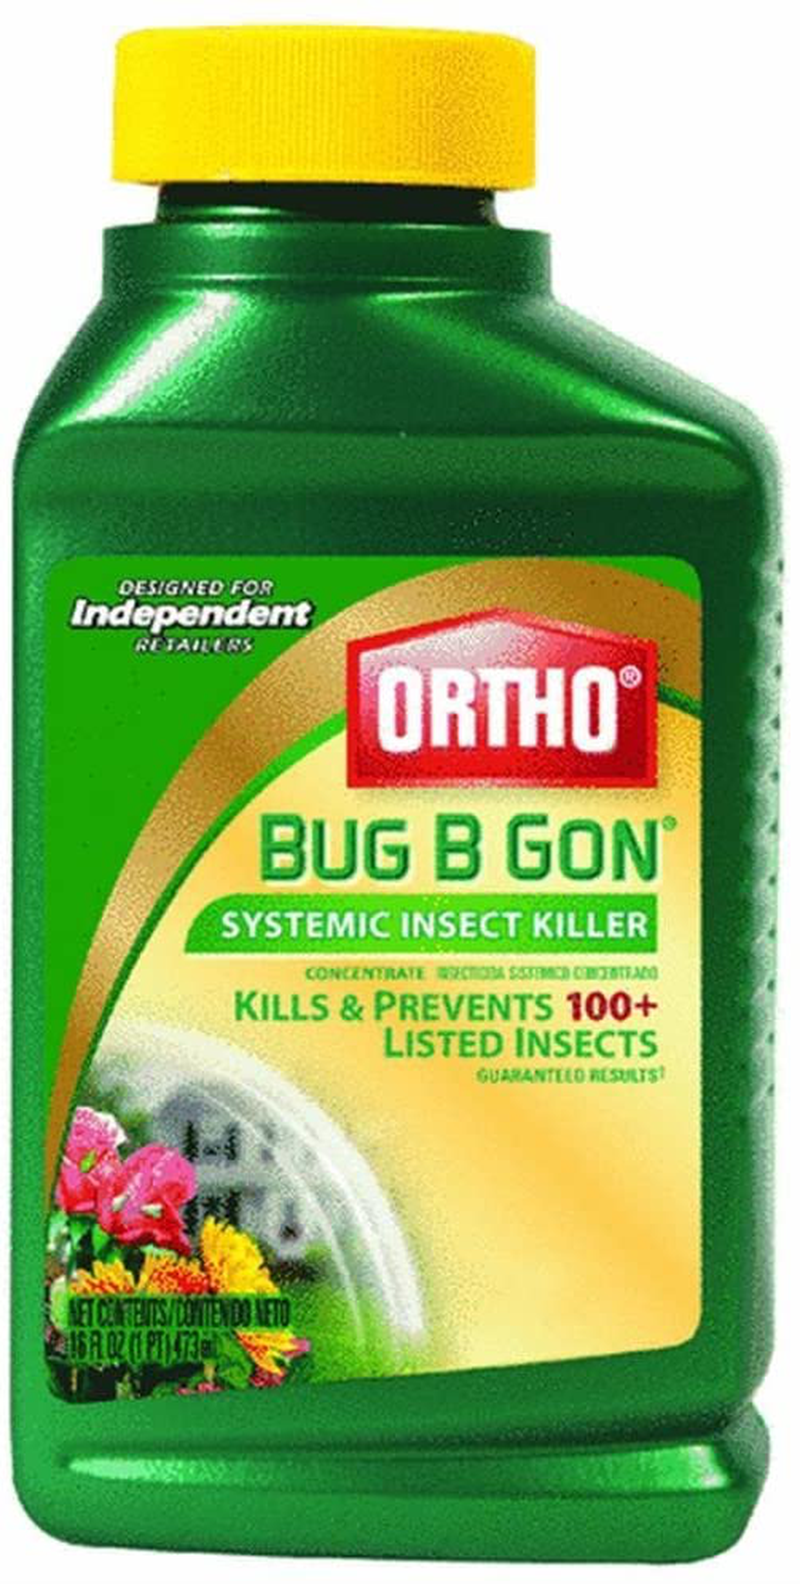 Scotts Company 1600610 Bug B Gon Systemic Insect Killer Concentrate, 16-Ounce